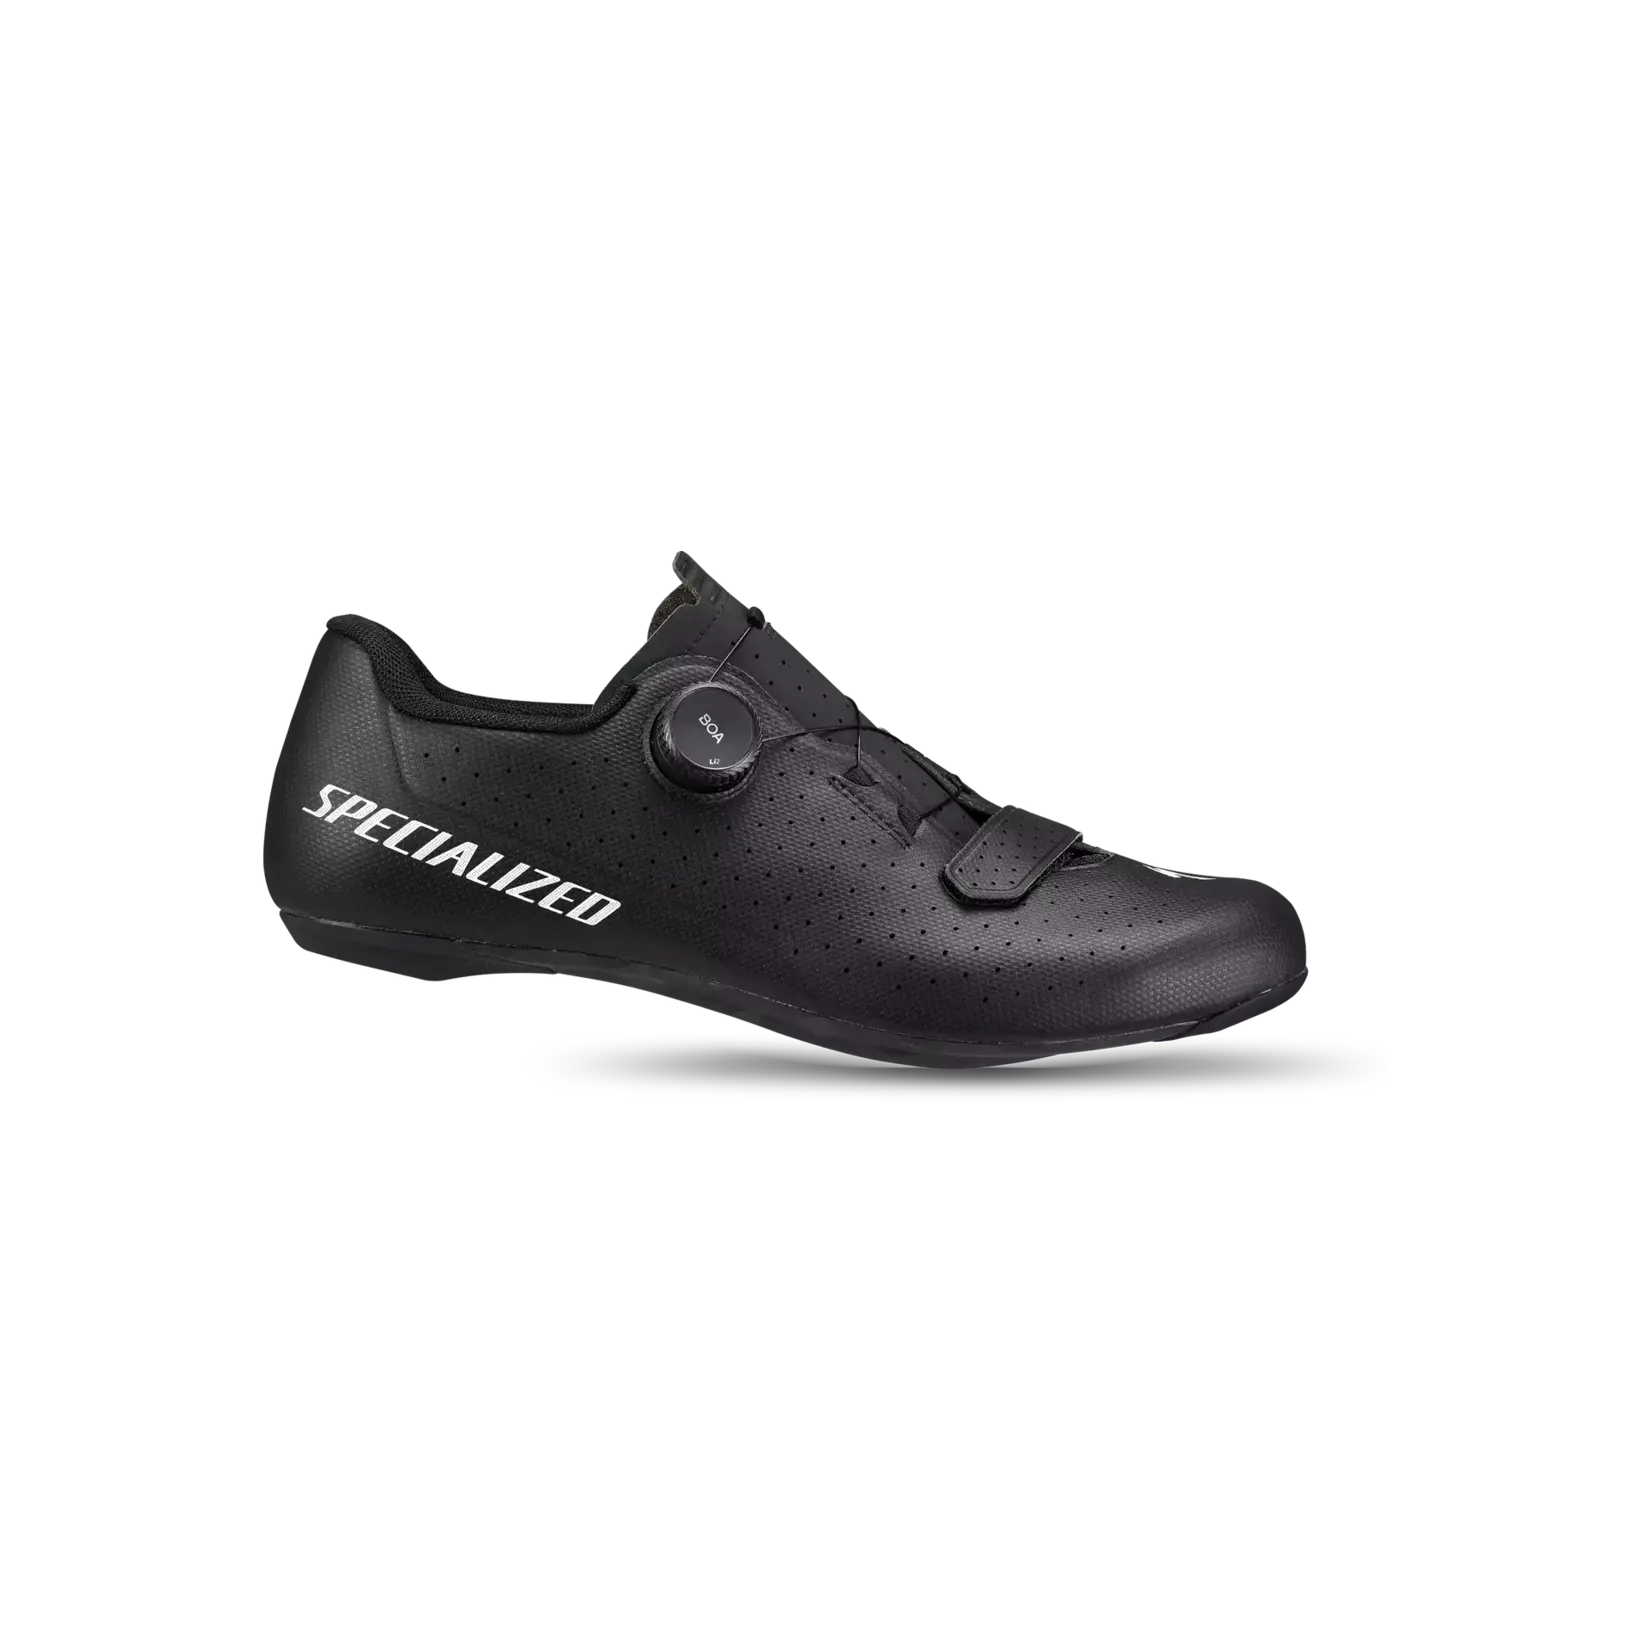 Specialized Torch 2.0 Road Shoe Black